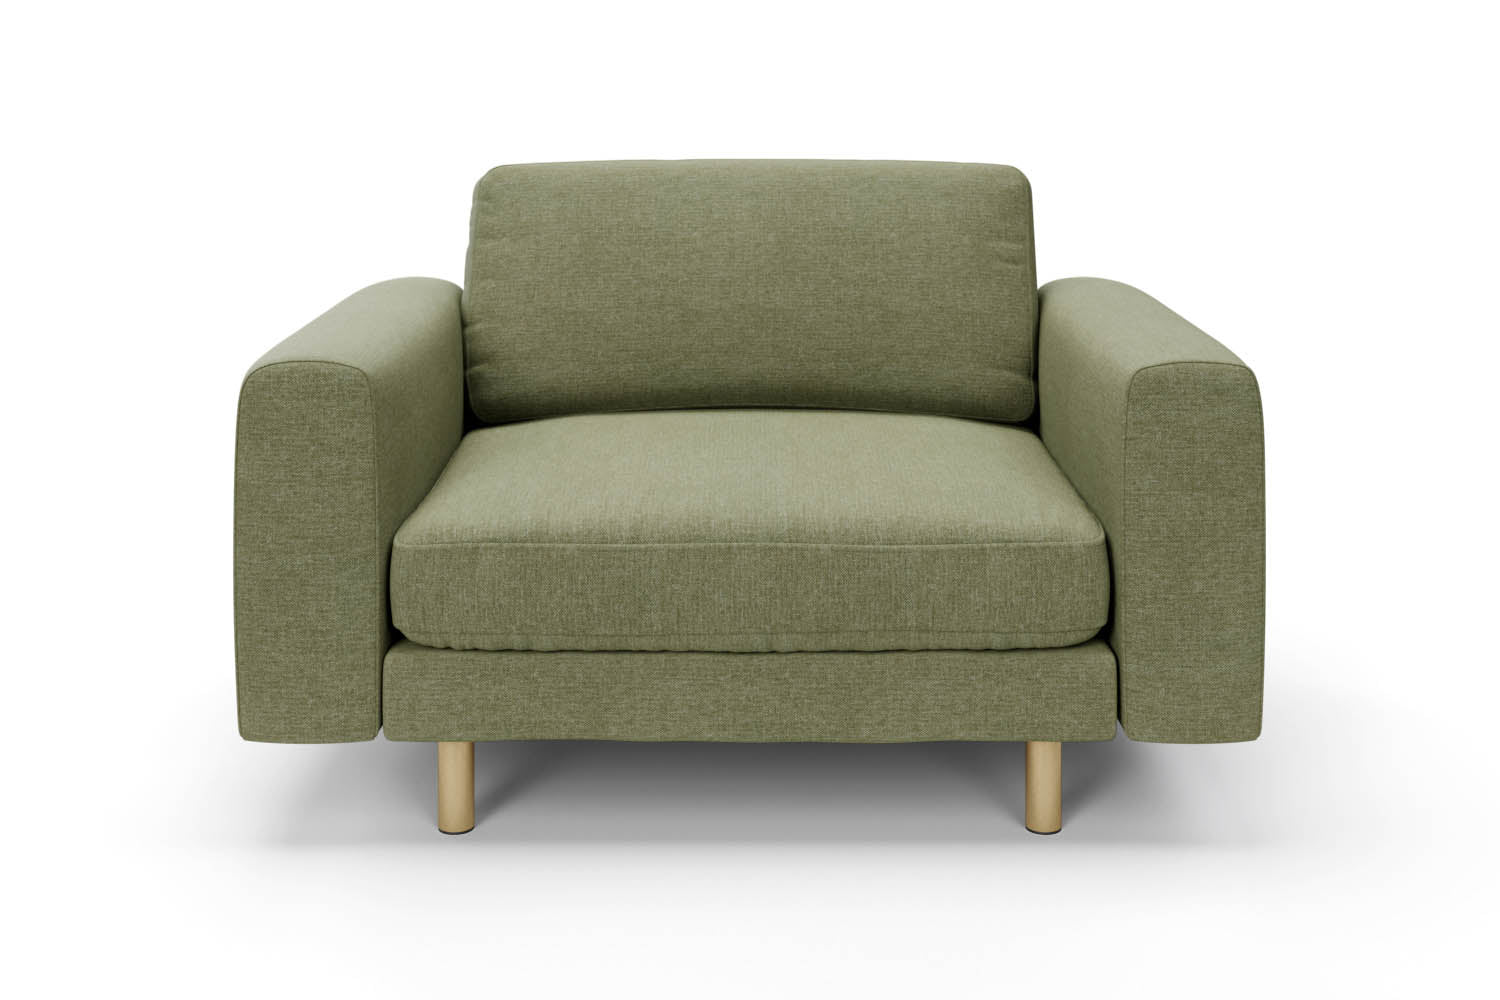 The Big Chill Snuggler in Sage Chenille with metal legs front variant_40886316990512